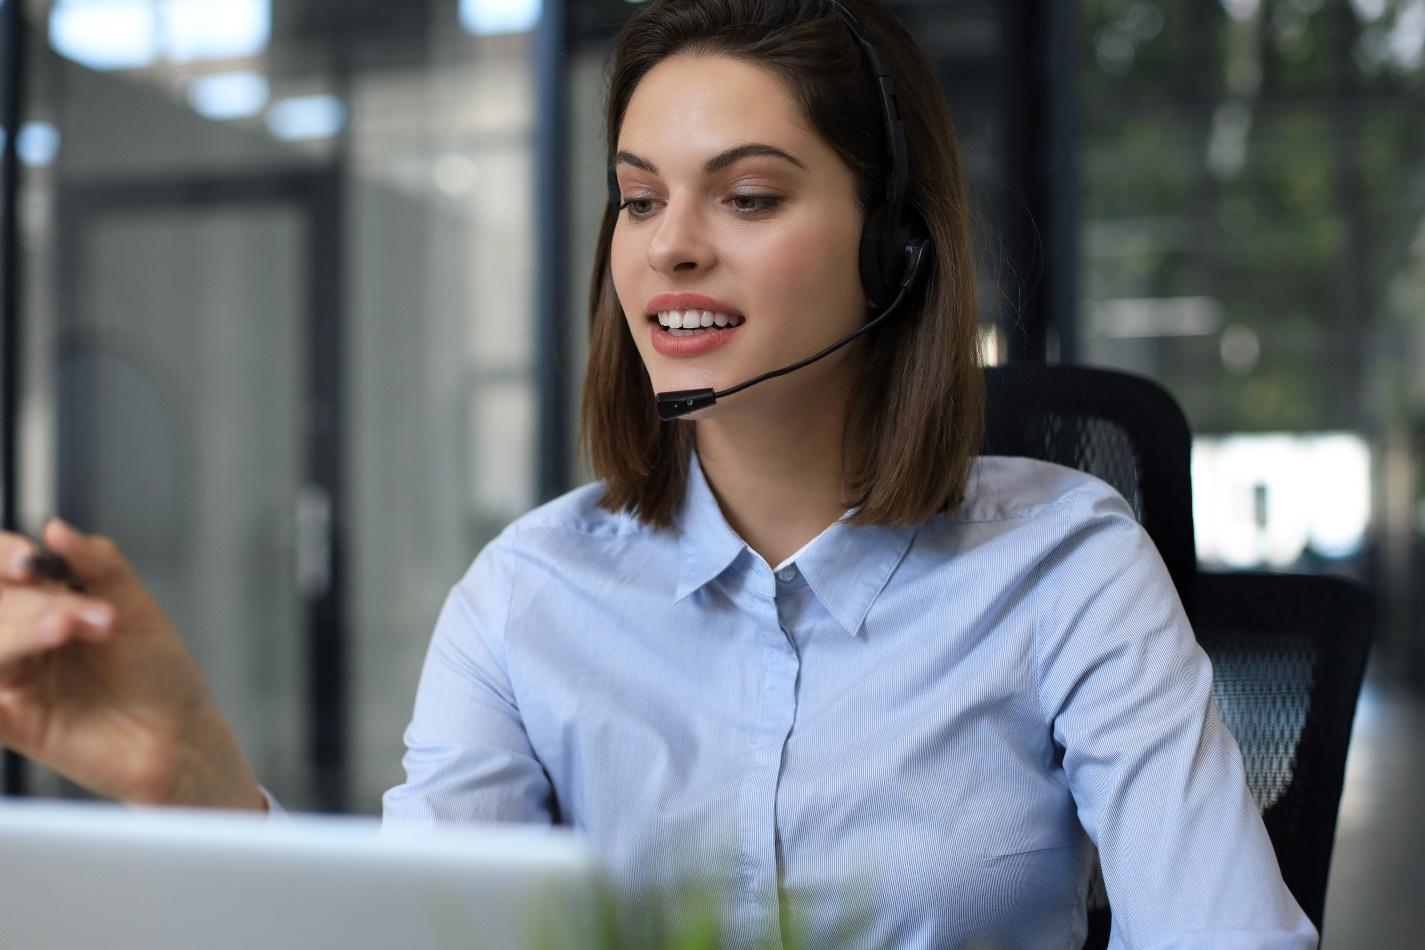 An IT help desk worker with a headset helping a client.